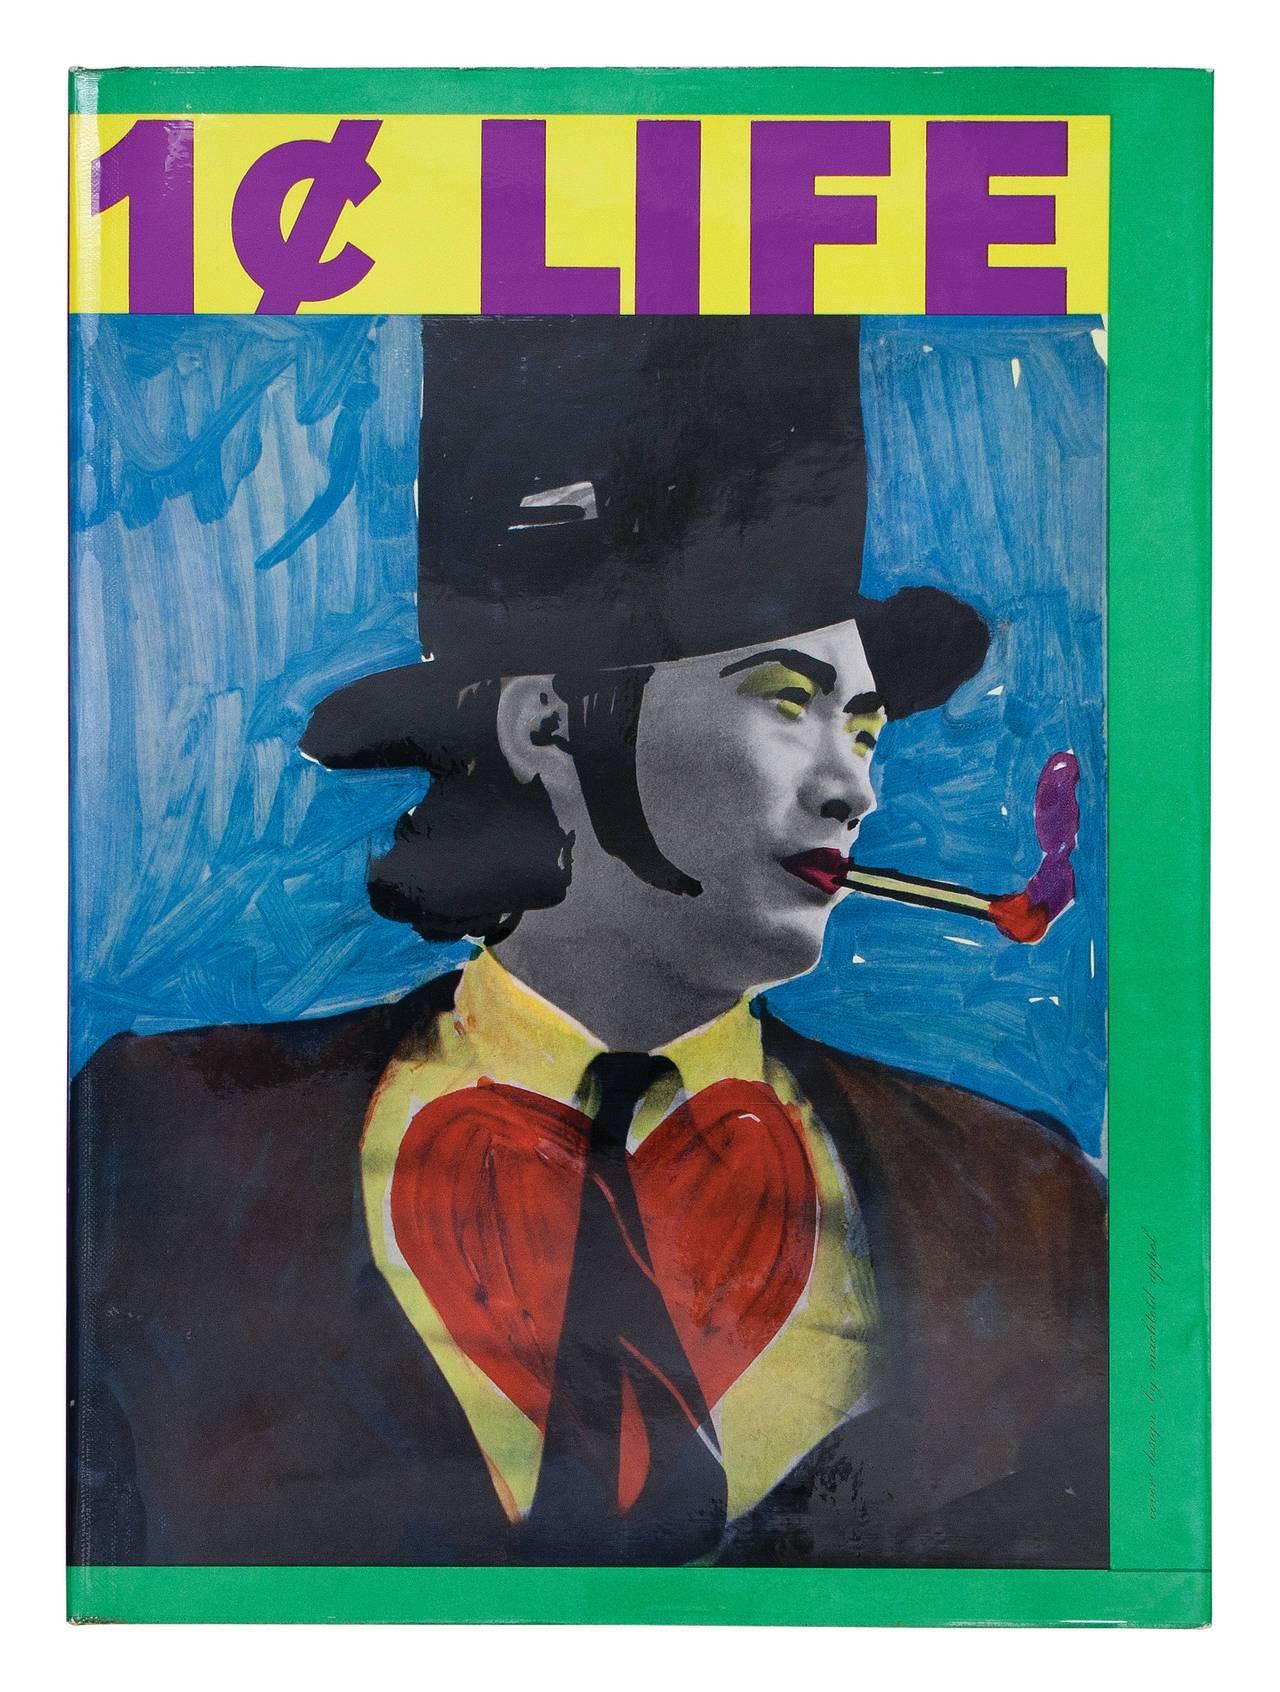 1 ¢ Life by Walasse Ting, Illustrated by Roy Lichtenstein, Andy Warhol and More 4